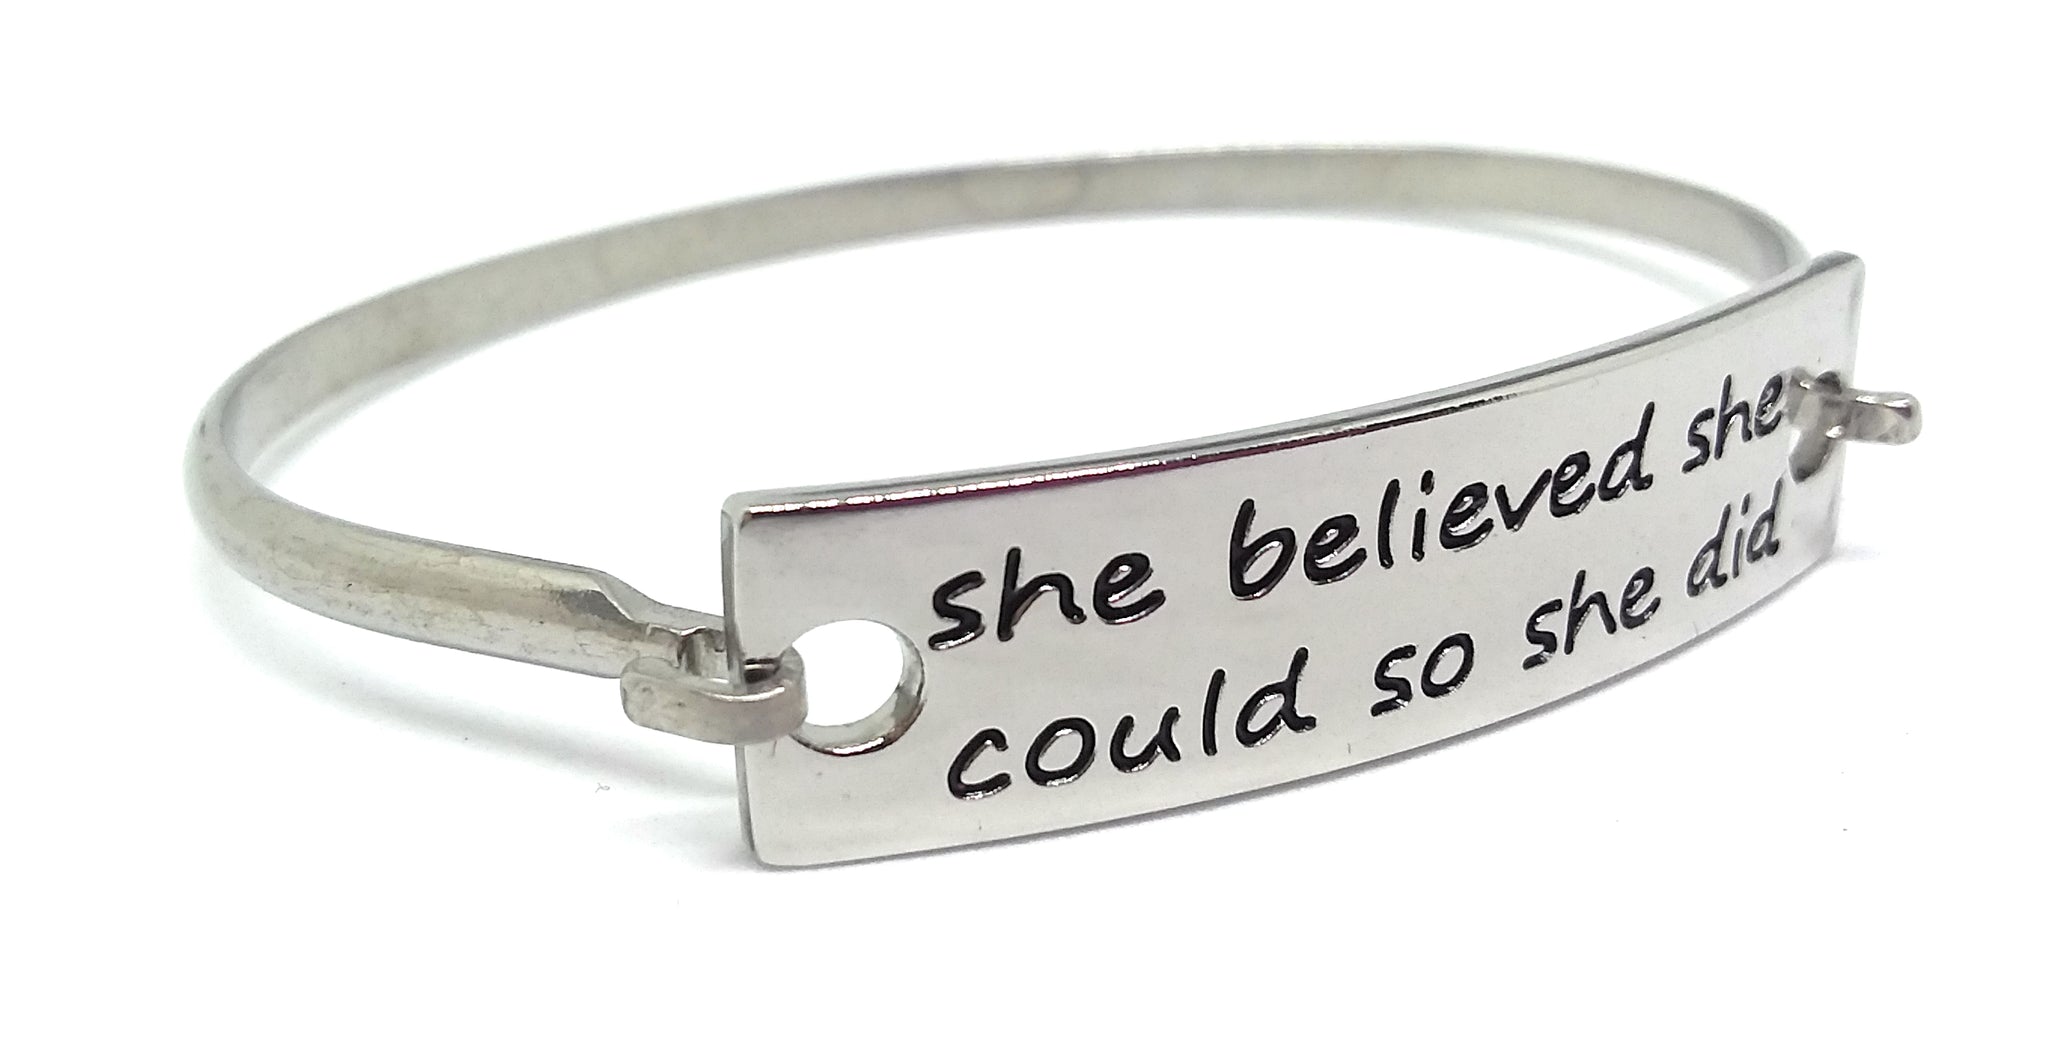 Stainless Steel Inspirational Message Connector Bangle Bracelet - she believed she could so she did